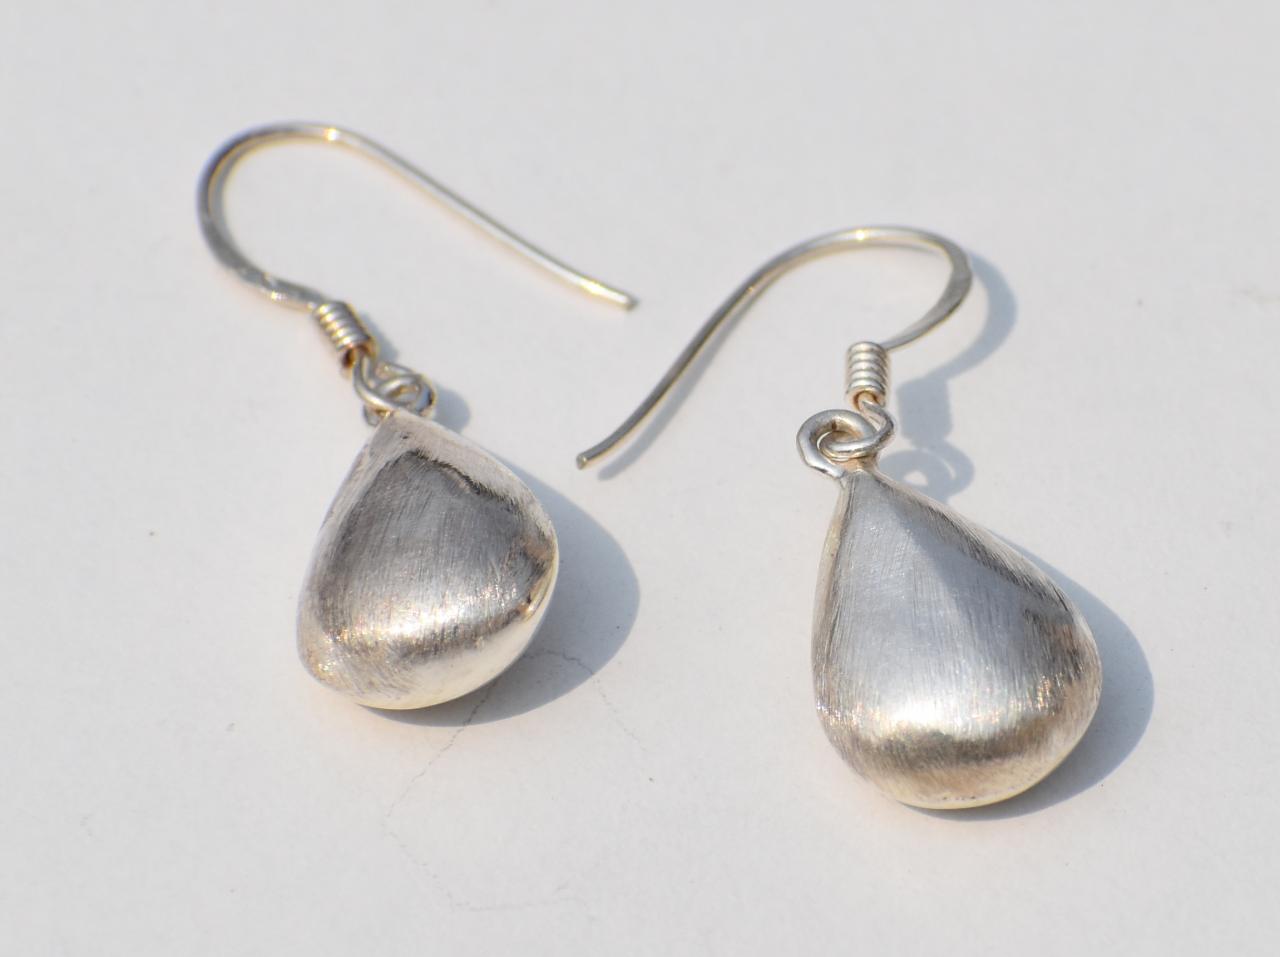 Earrings, 925 Silver Jewelry, Dangle Jewelry, Thanksgiving Jewelry, Wedding Jewelry, Women's Fashion, Gift For Her, Dangled Silver